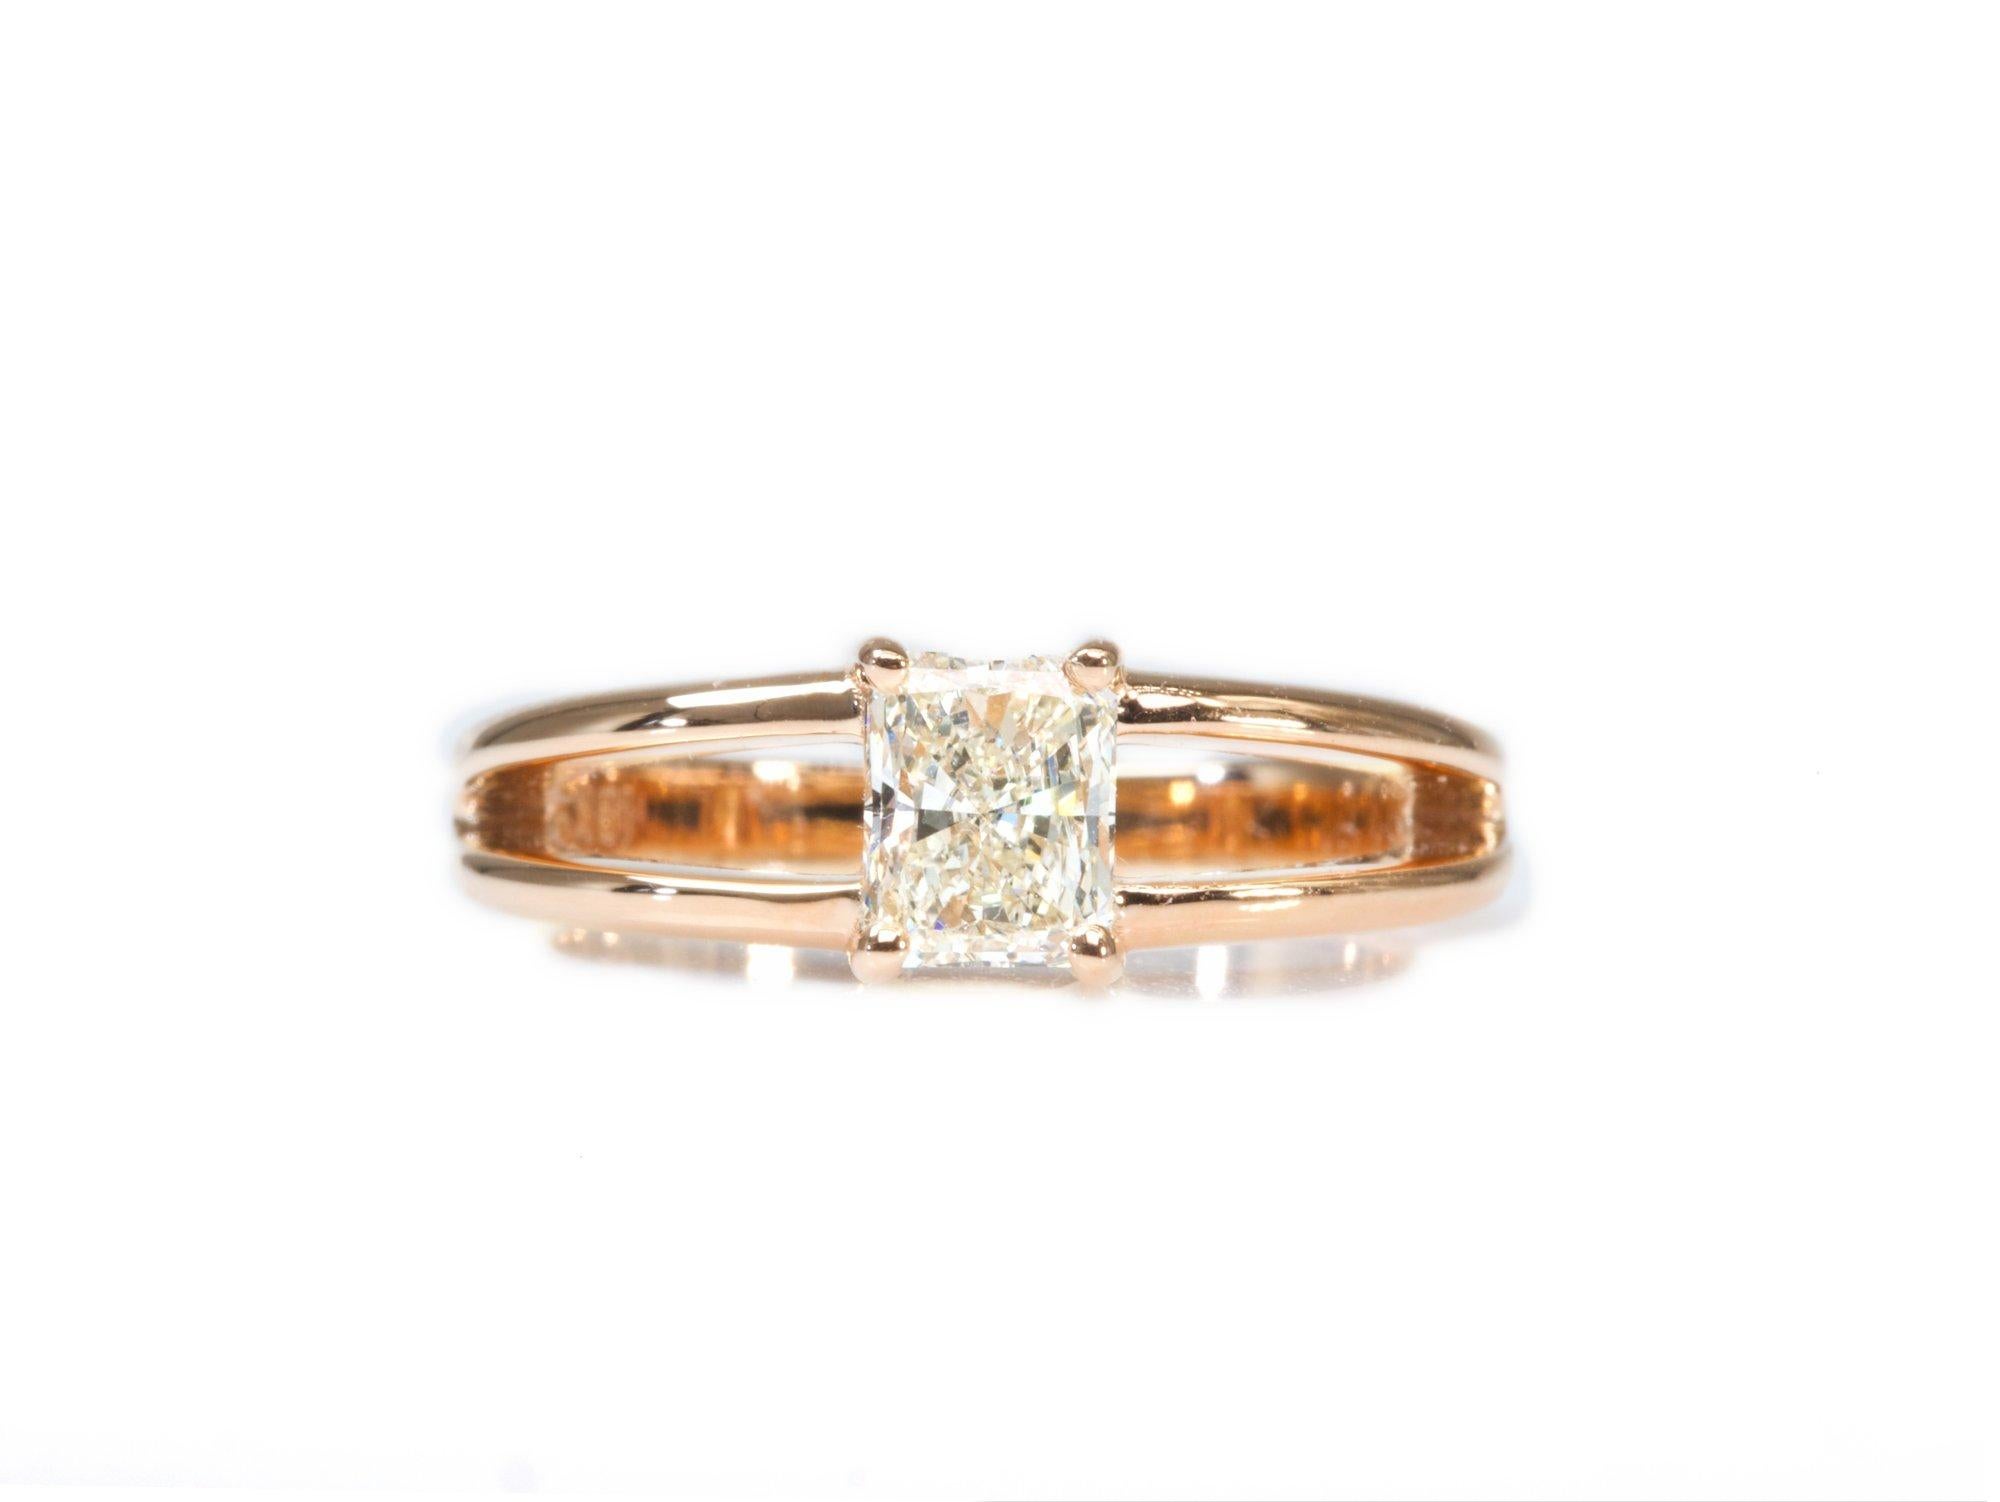 Women's Stunning 18K Rose Gold Ring with 0.50 carat Natural Diamond- GIA Certificate For Sale